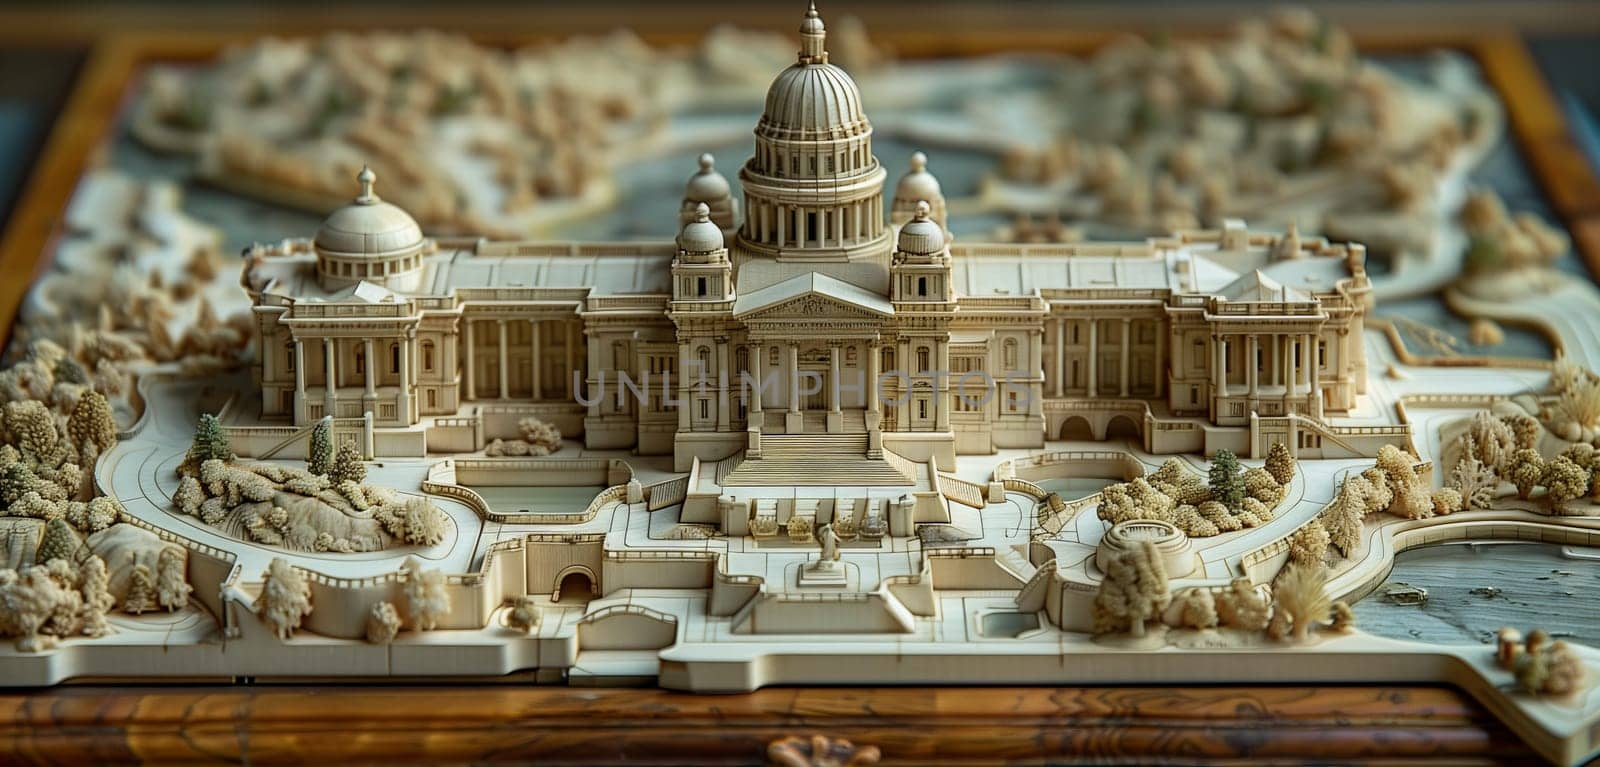 An intricate model of the Capitol Building, an iconic tourist attraction, is displayed on a wooden table, showcasing medieval architecture and history